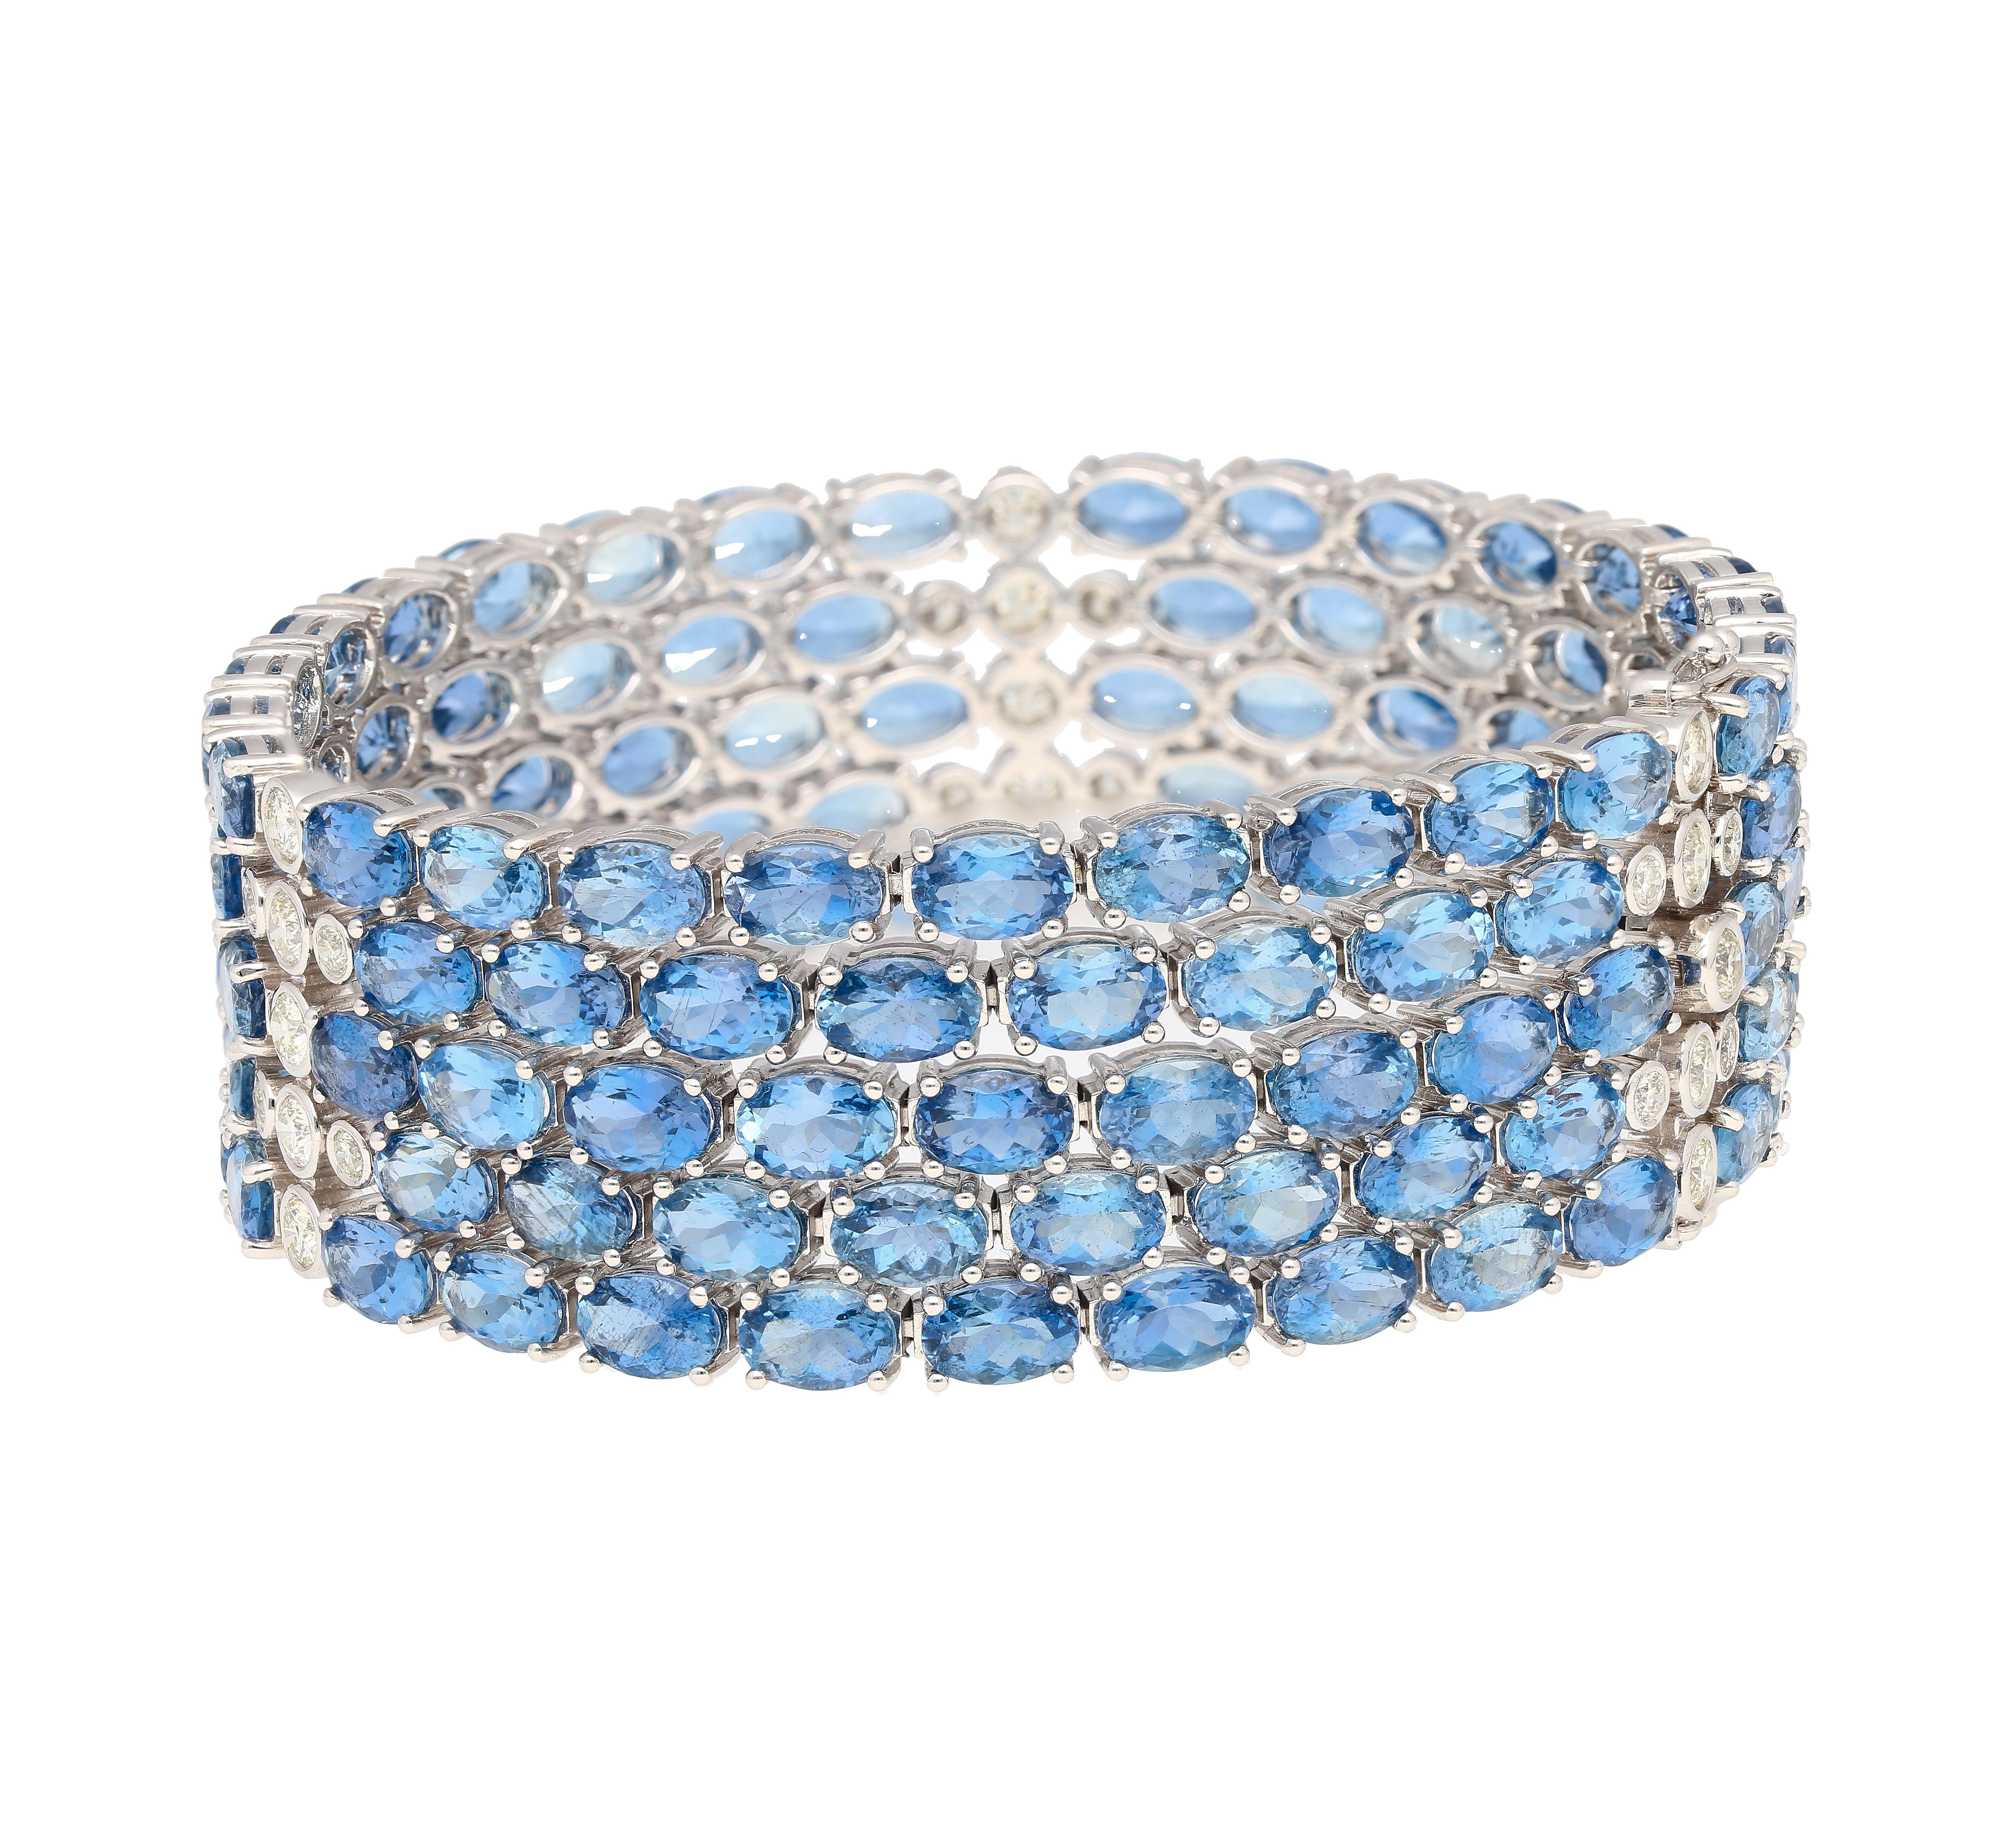 53 Carat Oval Cut Aquamarine and Diamond Multi Row Tennis Bracelet in White Gold In New Condition For Sale In Miami, FL